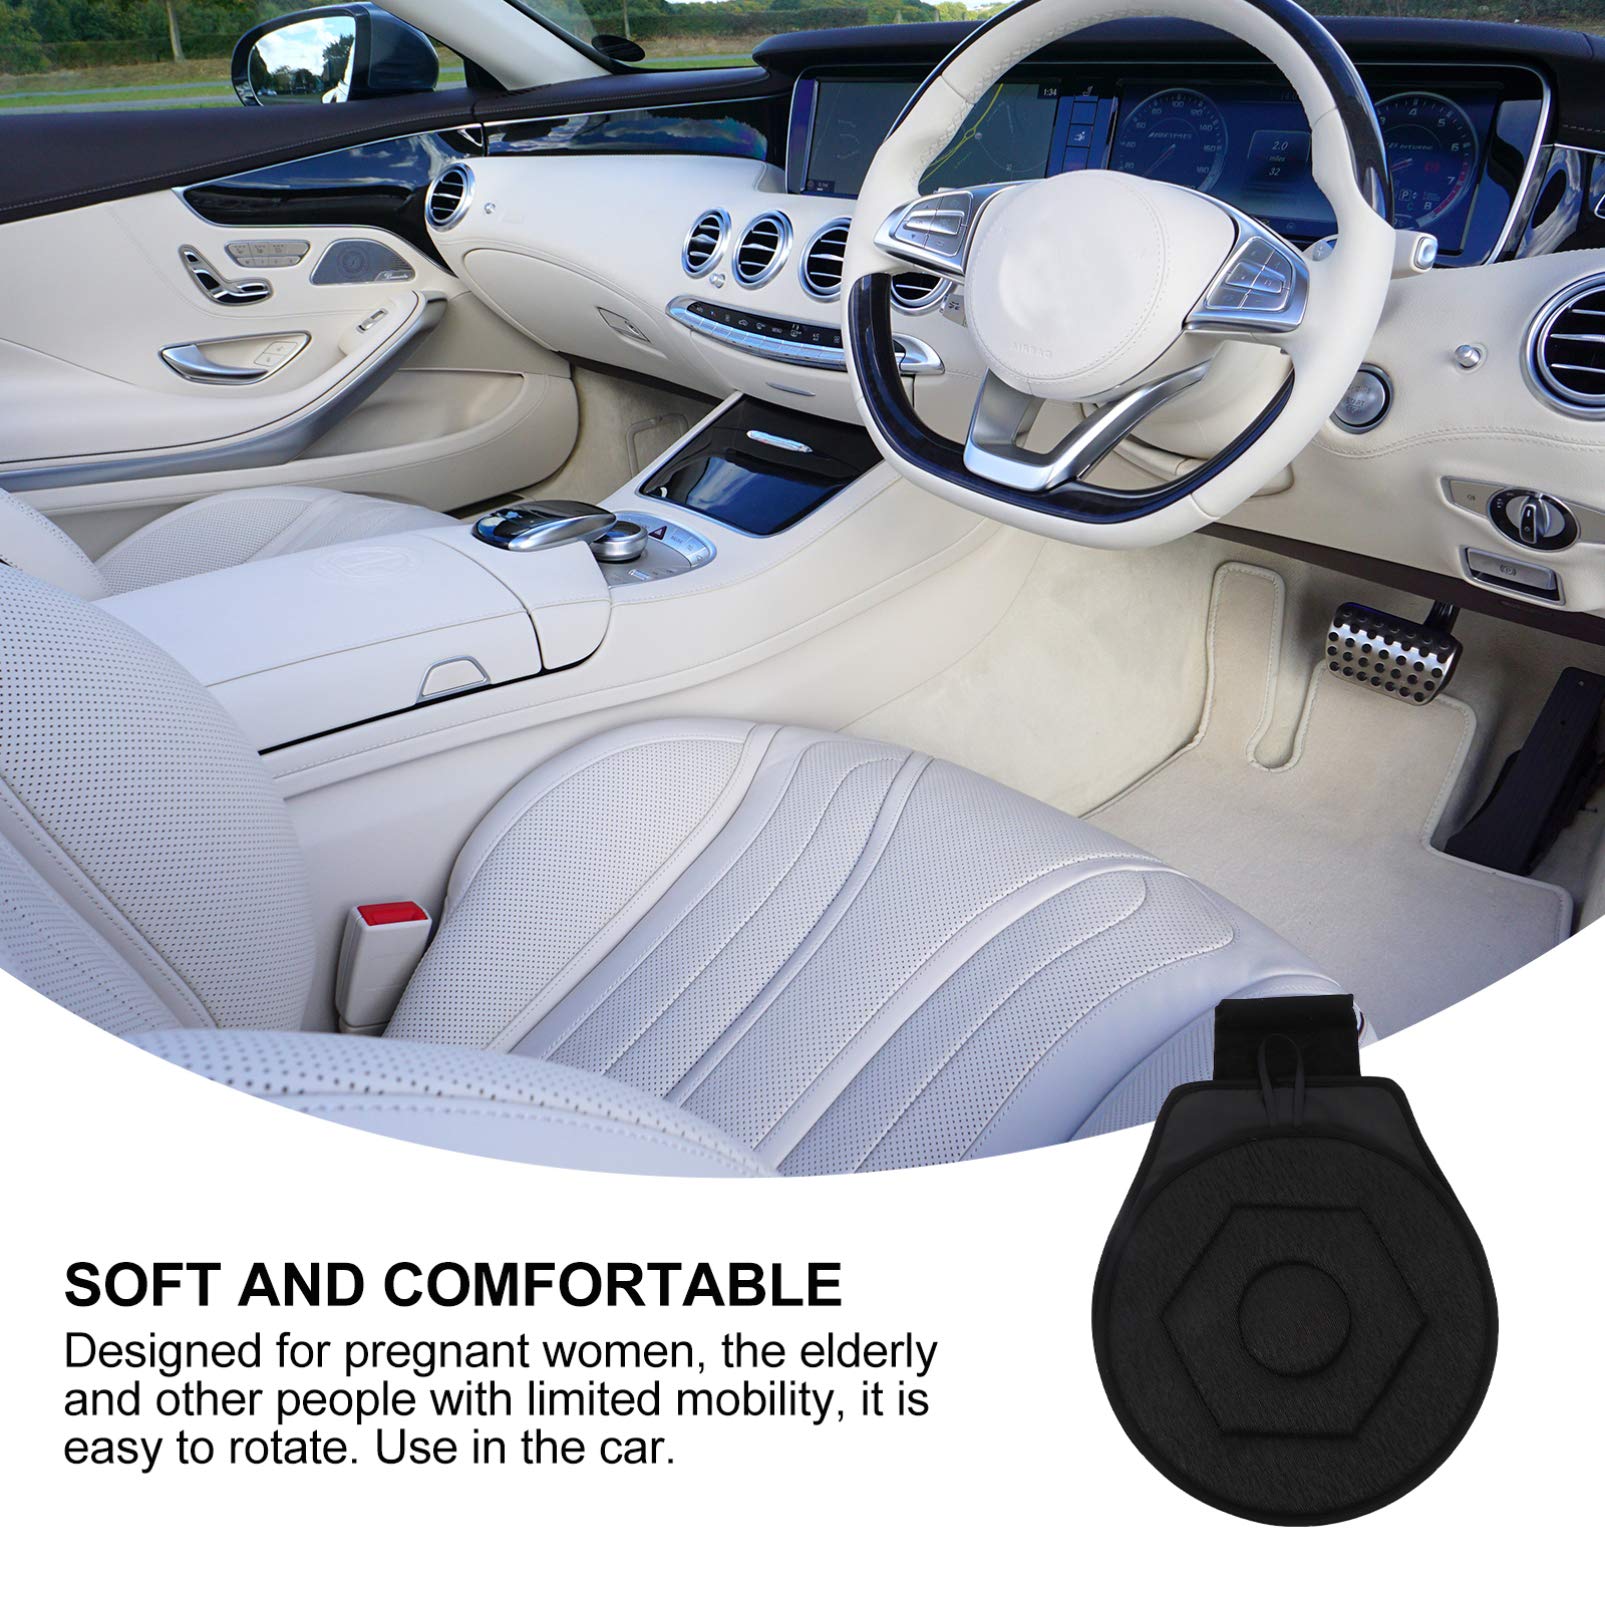 EXCEART 360 Degree Swivel Seat Cushion Rotating Swivel Car Seat Cushion Lumbar Support Pillow for Car Chair and Seat Swivel Car Chair Pad (Black)